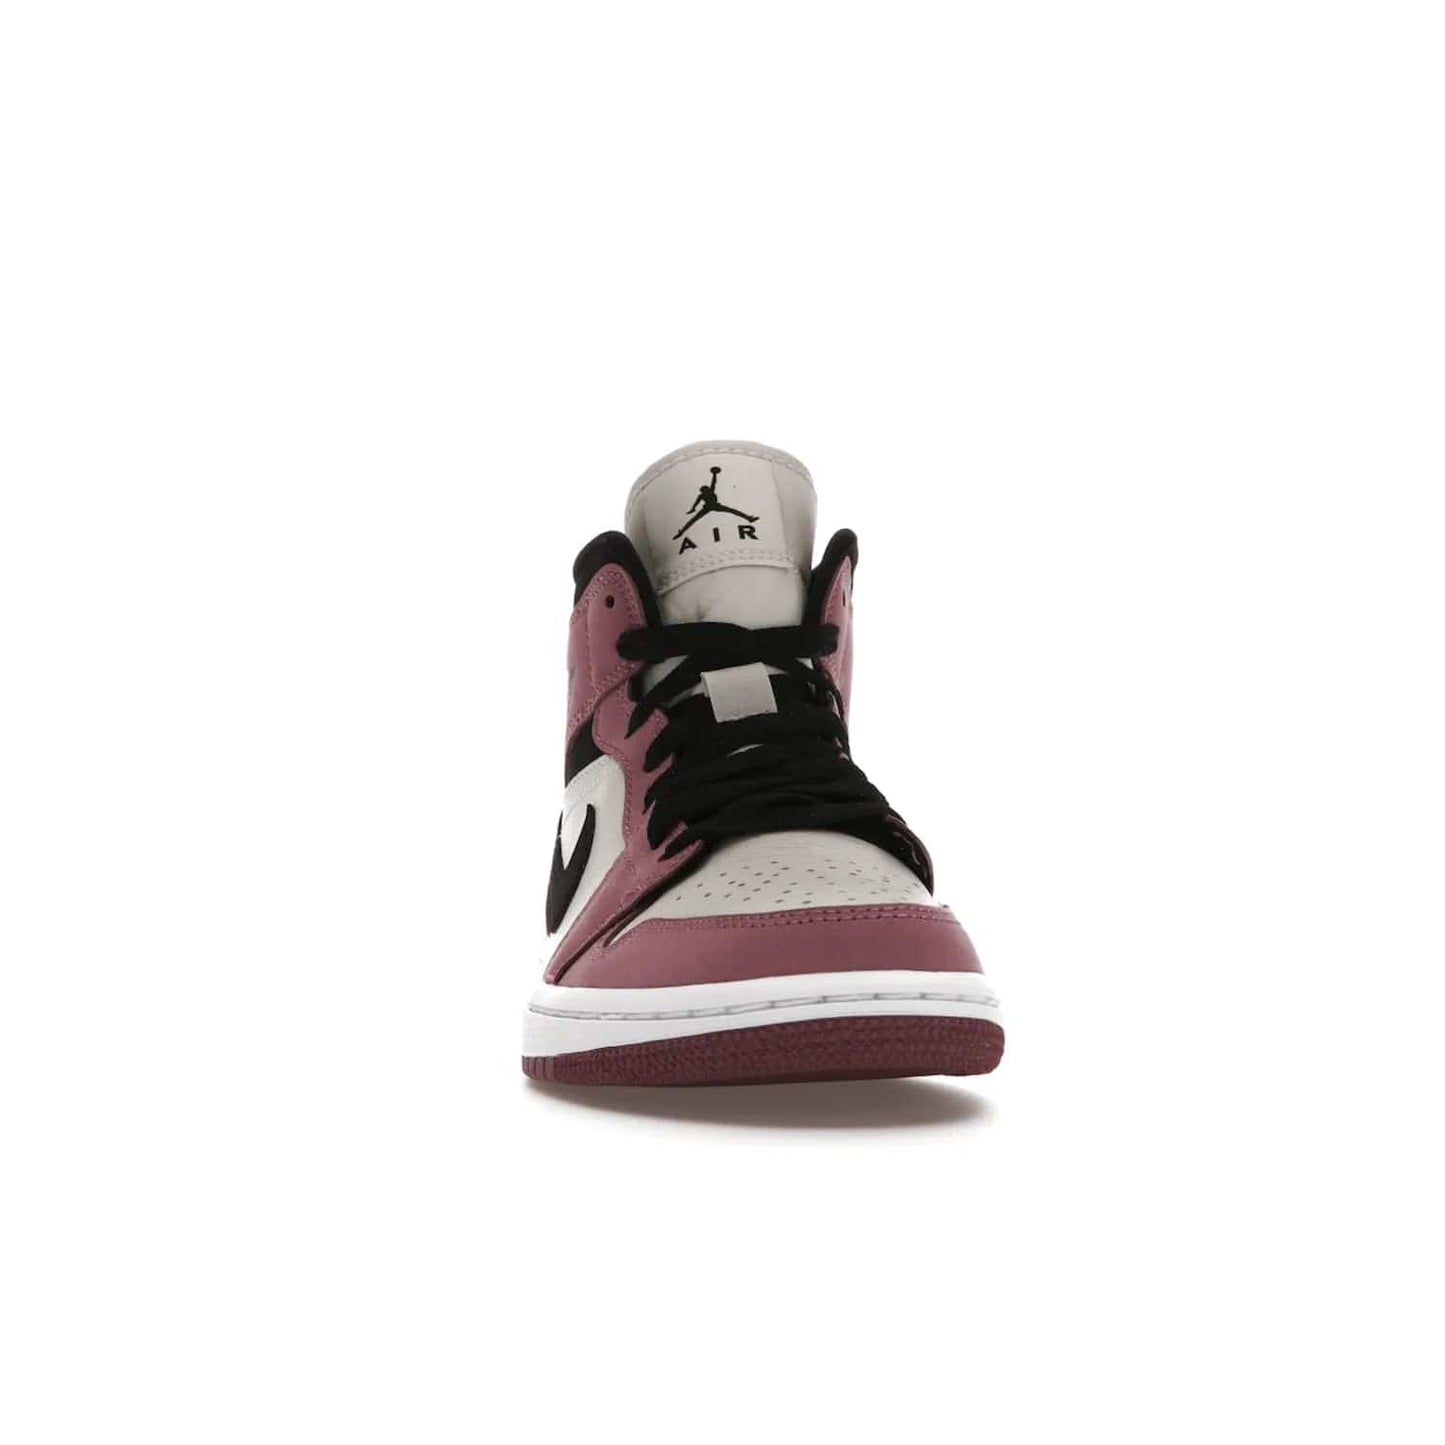 Jordan 1 Mid SE Light Mulberry (Women's) - Image 9 - Only at www.BallersClubKickz.com - Classic style meets performance with the Air Jordan 1 Mid Light Mulberry (Women's). Sleek leather overlays and light bone detailing bring out the best of this classic sneaker, perfect for the active woman on-the-go. Available March 2022.